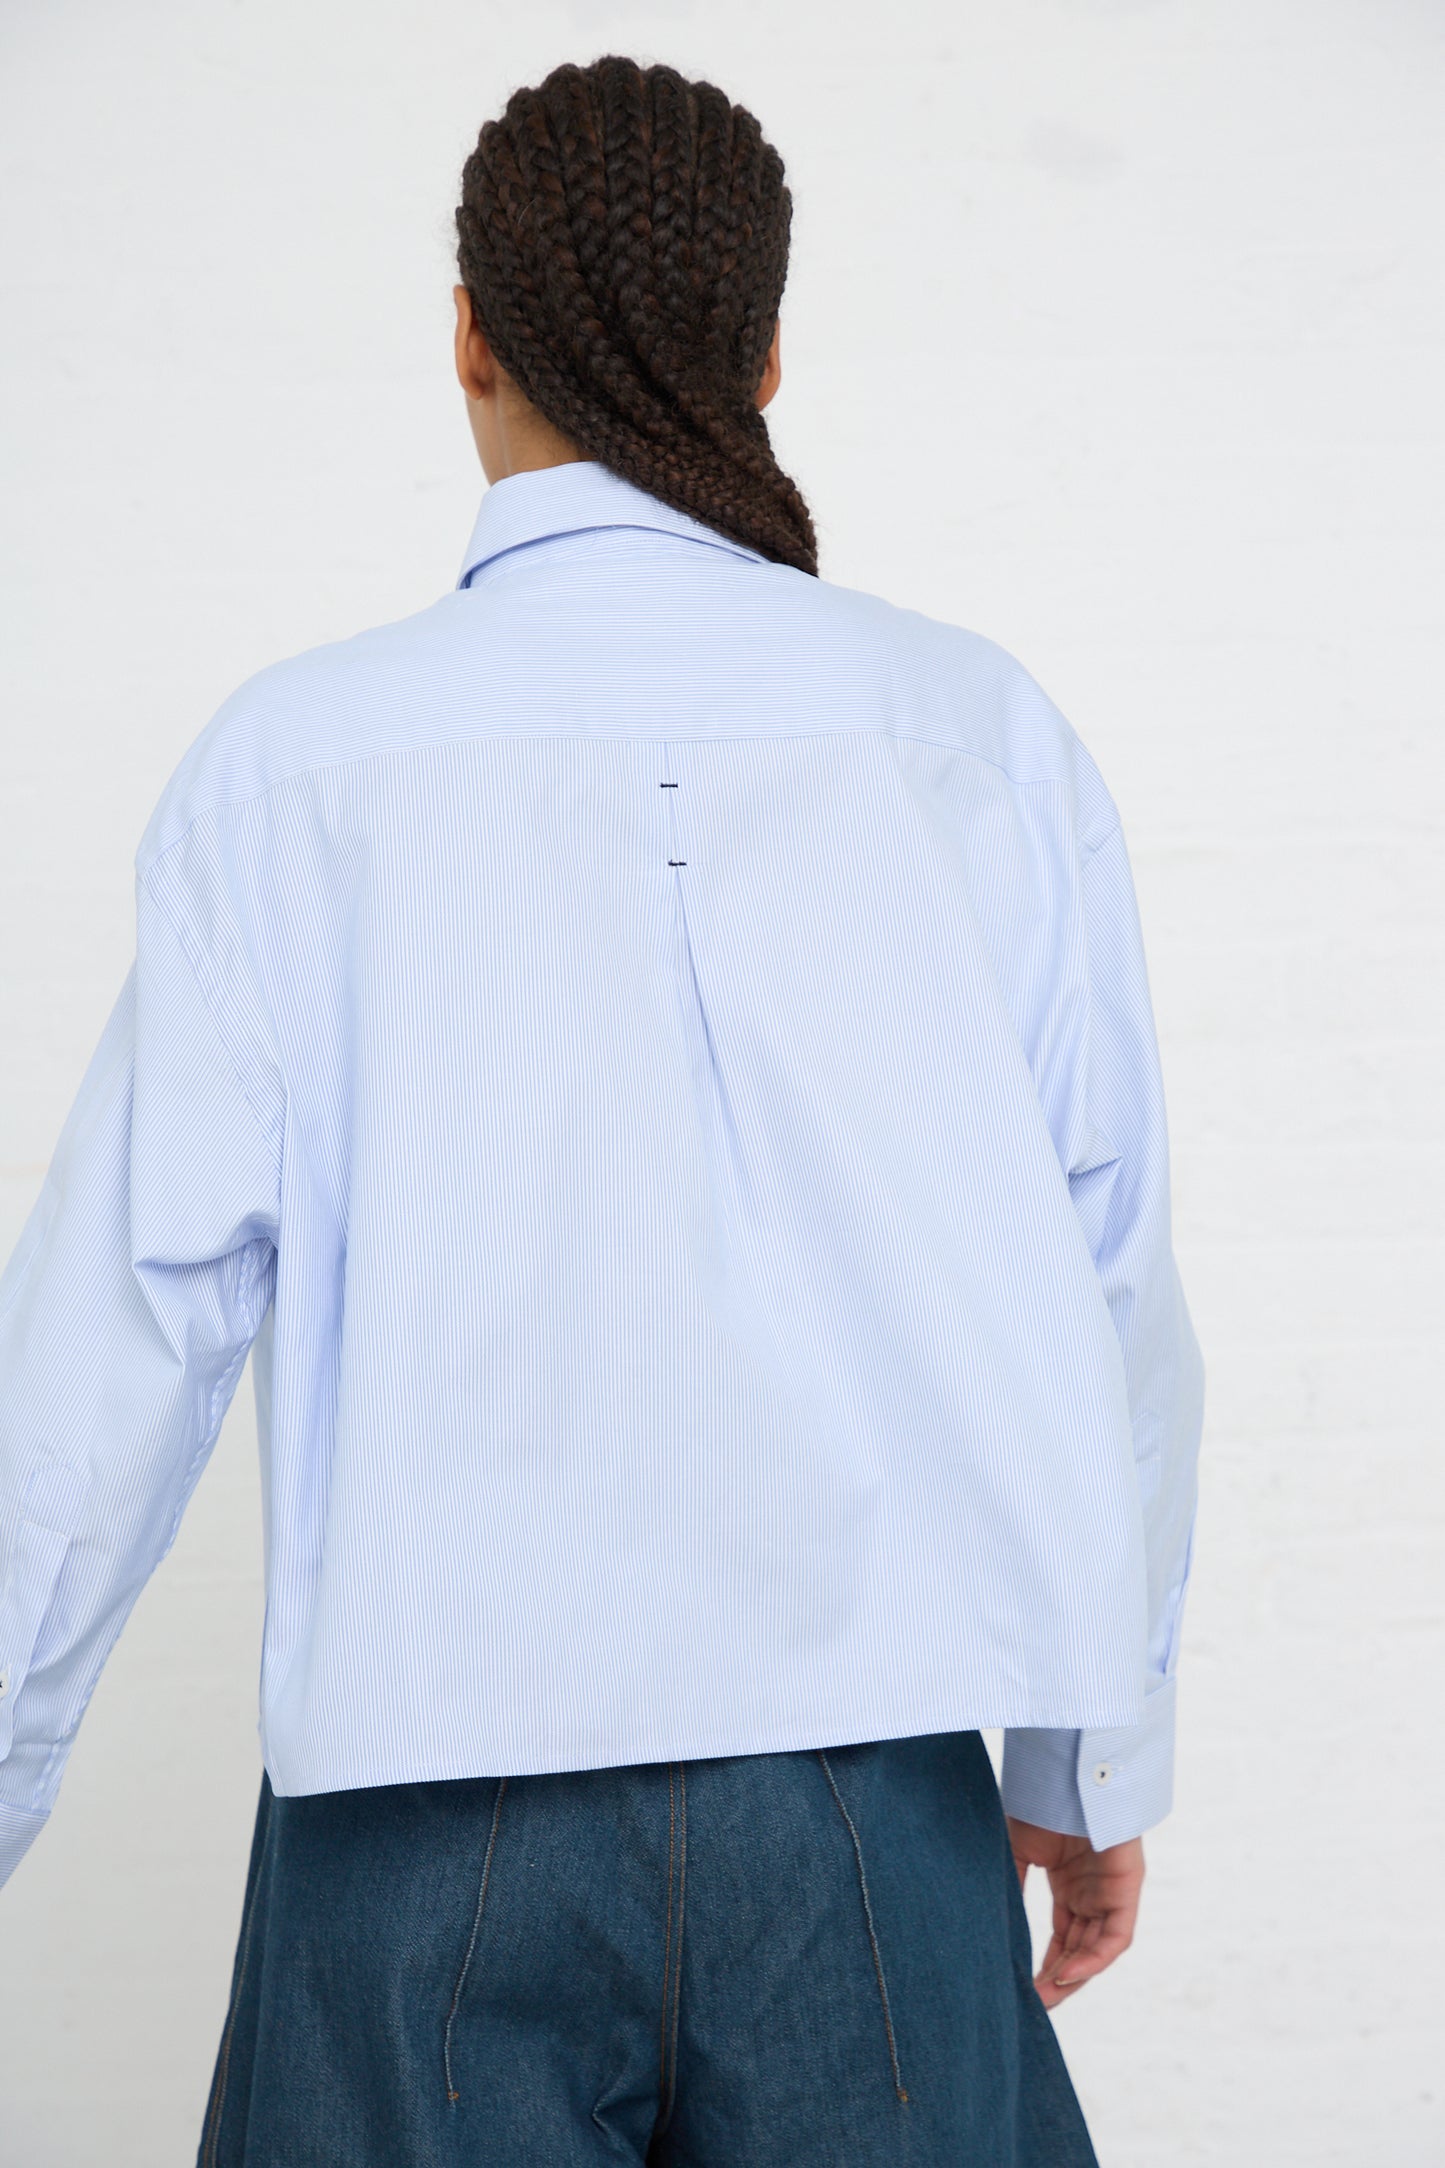 A person seen from behind wearing an Cordera Organic Oxford Shirt in Blue with an oversized fit and denim jeans.